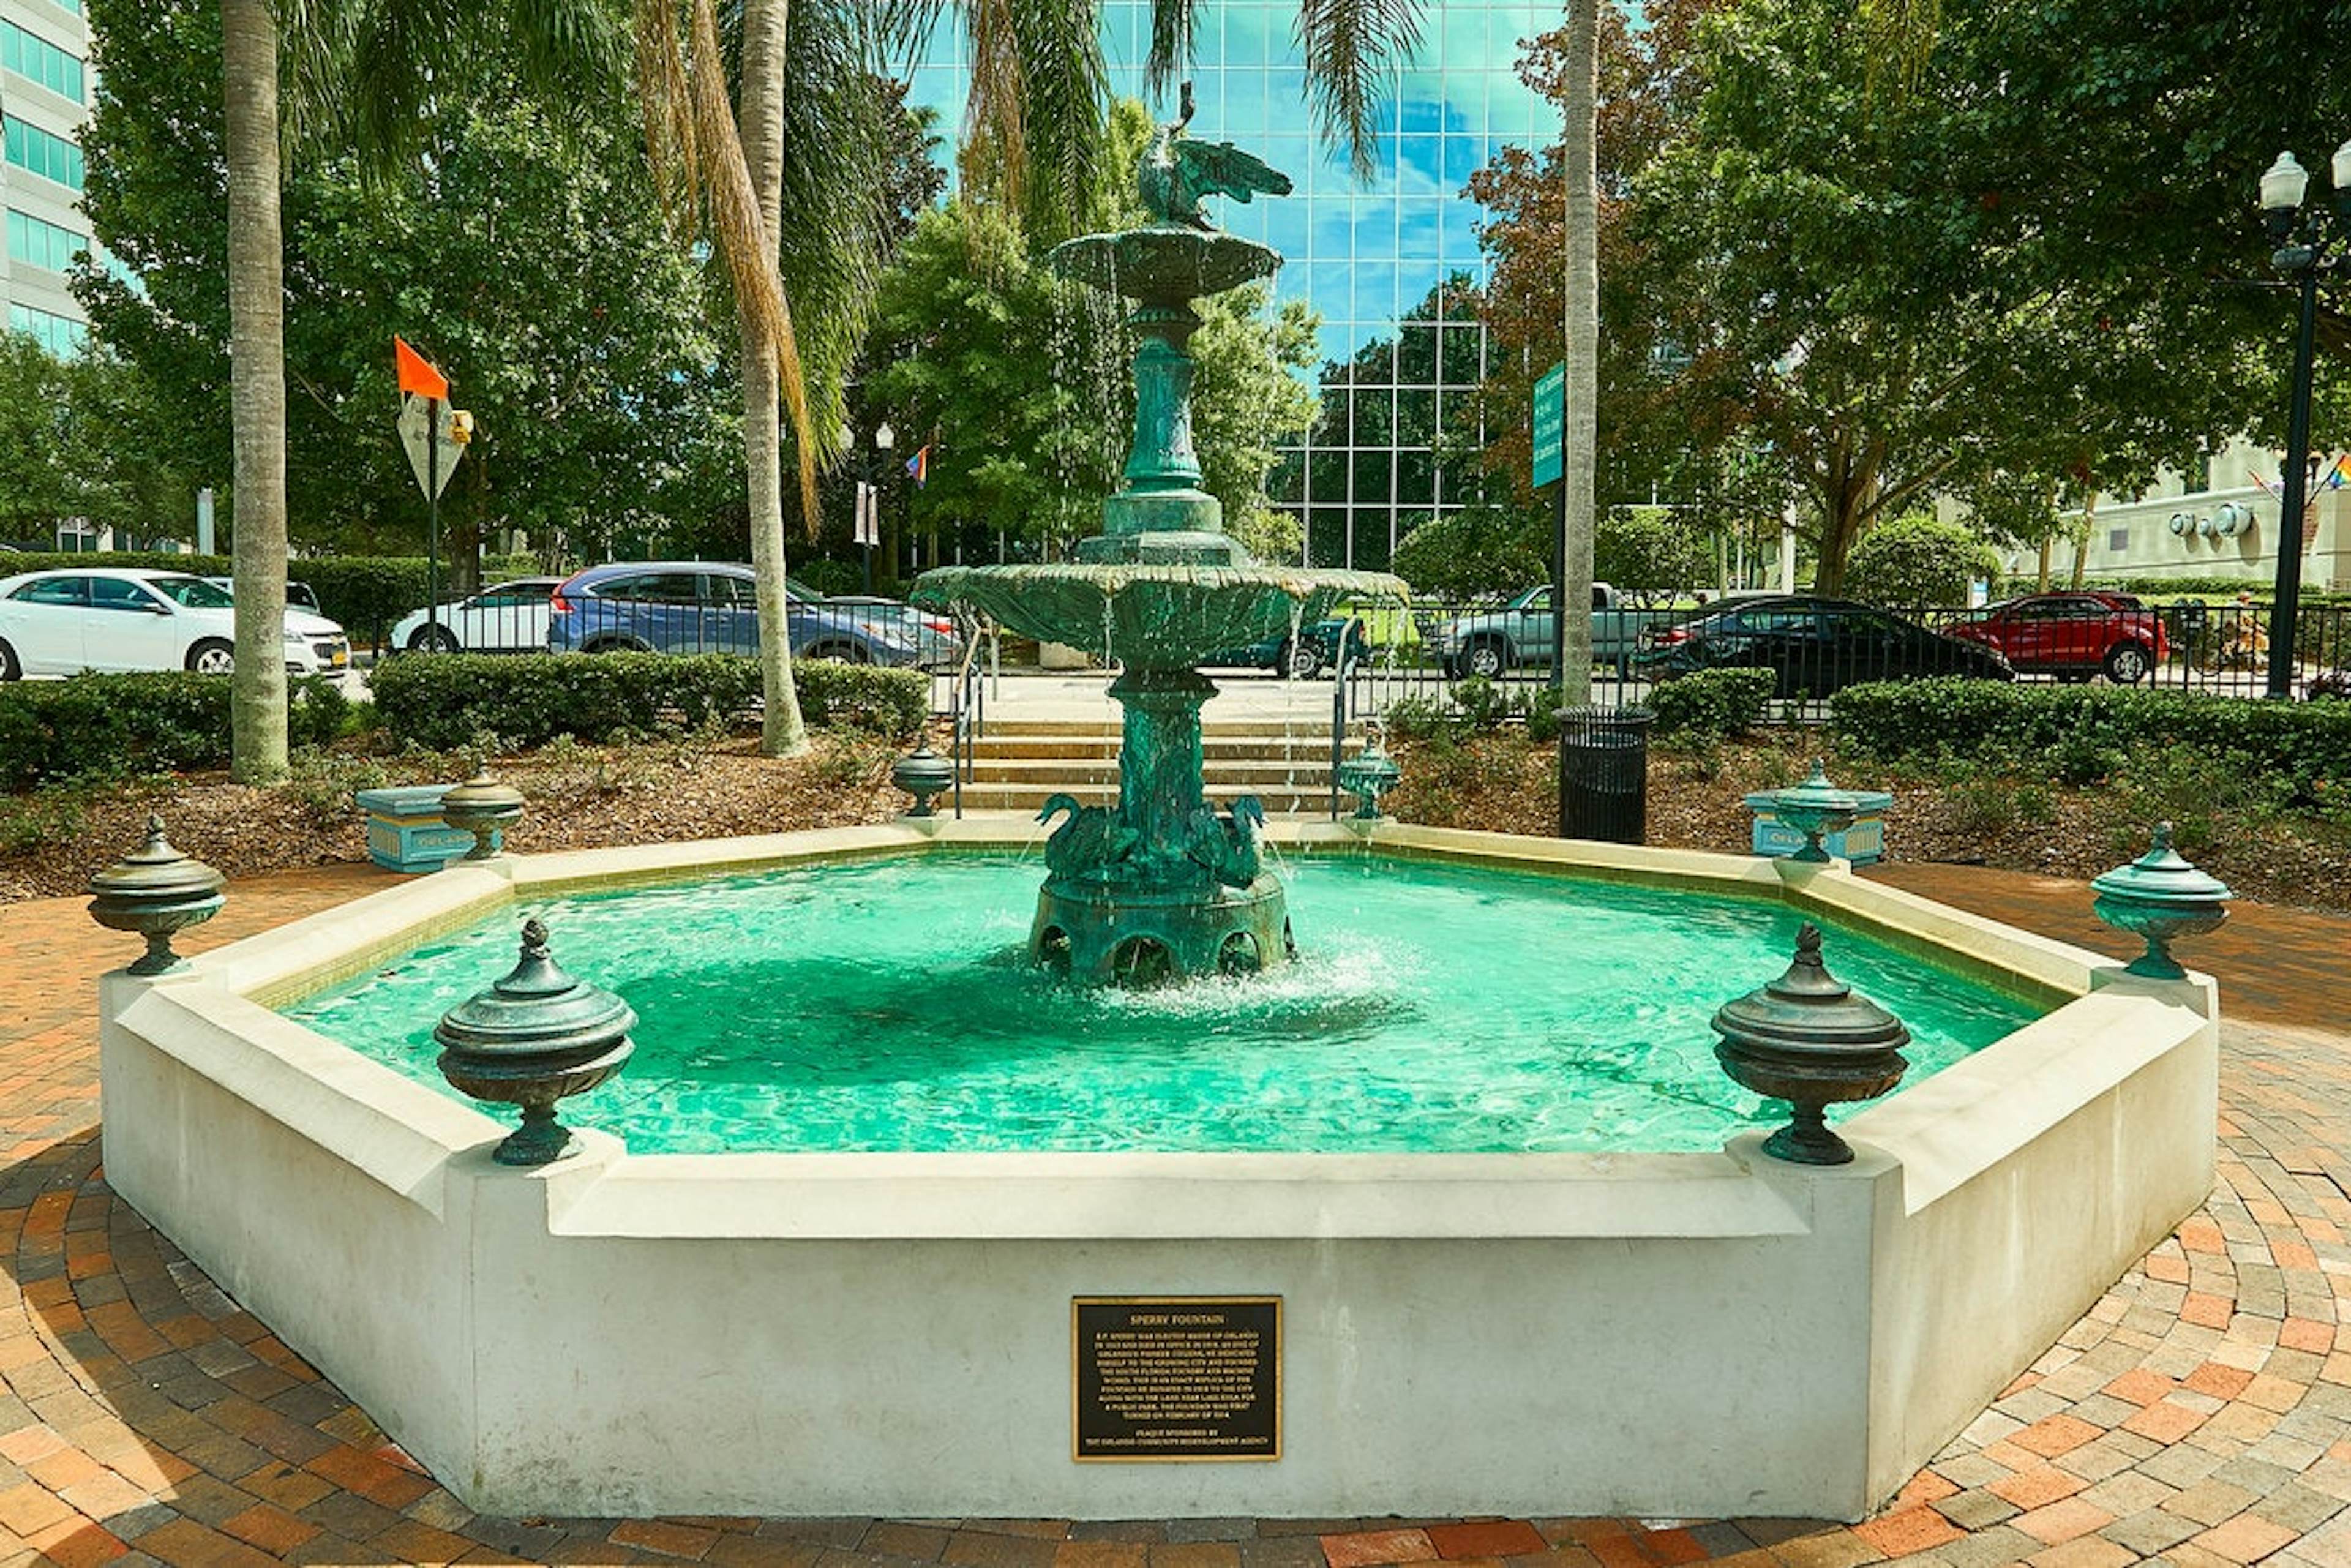 The Sperry Fountain